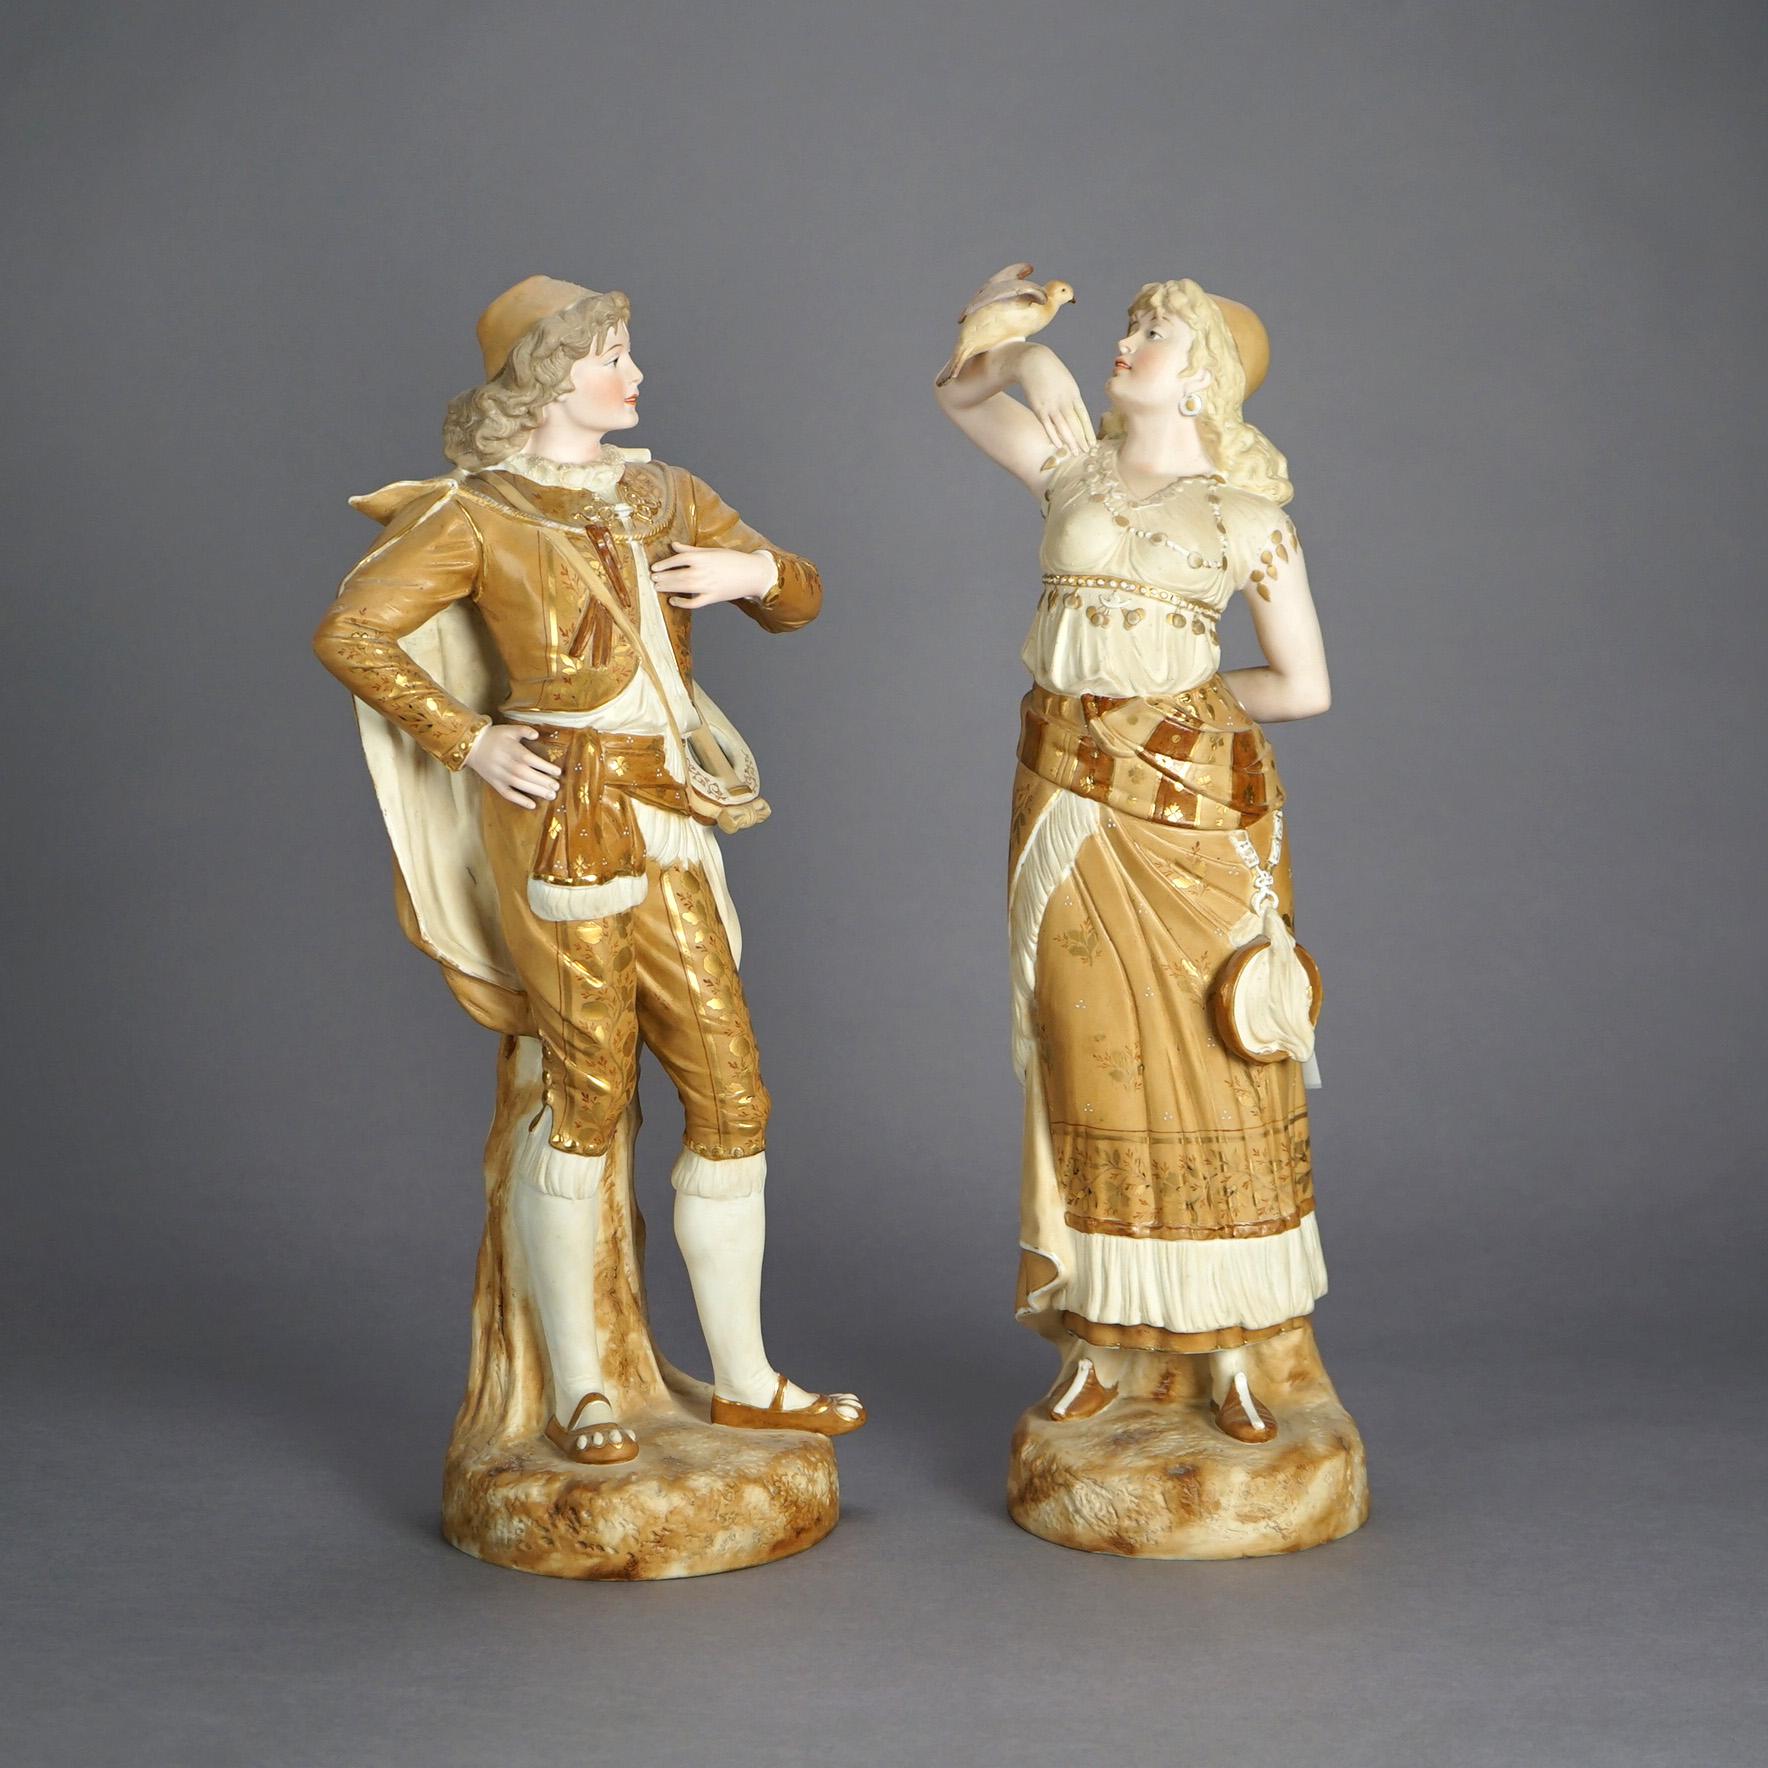 Molded Antique Pair of Continental Porcelain Bisque Statues, Courting Couple, c1900